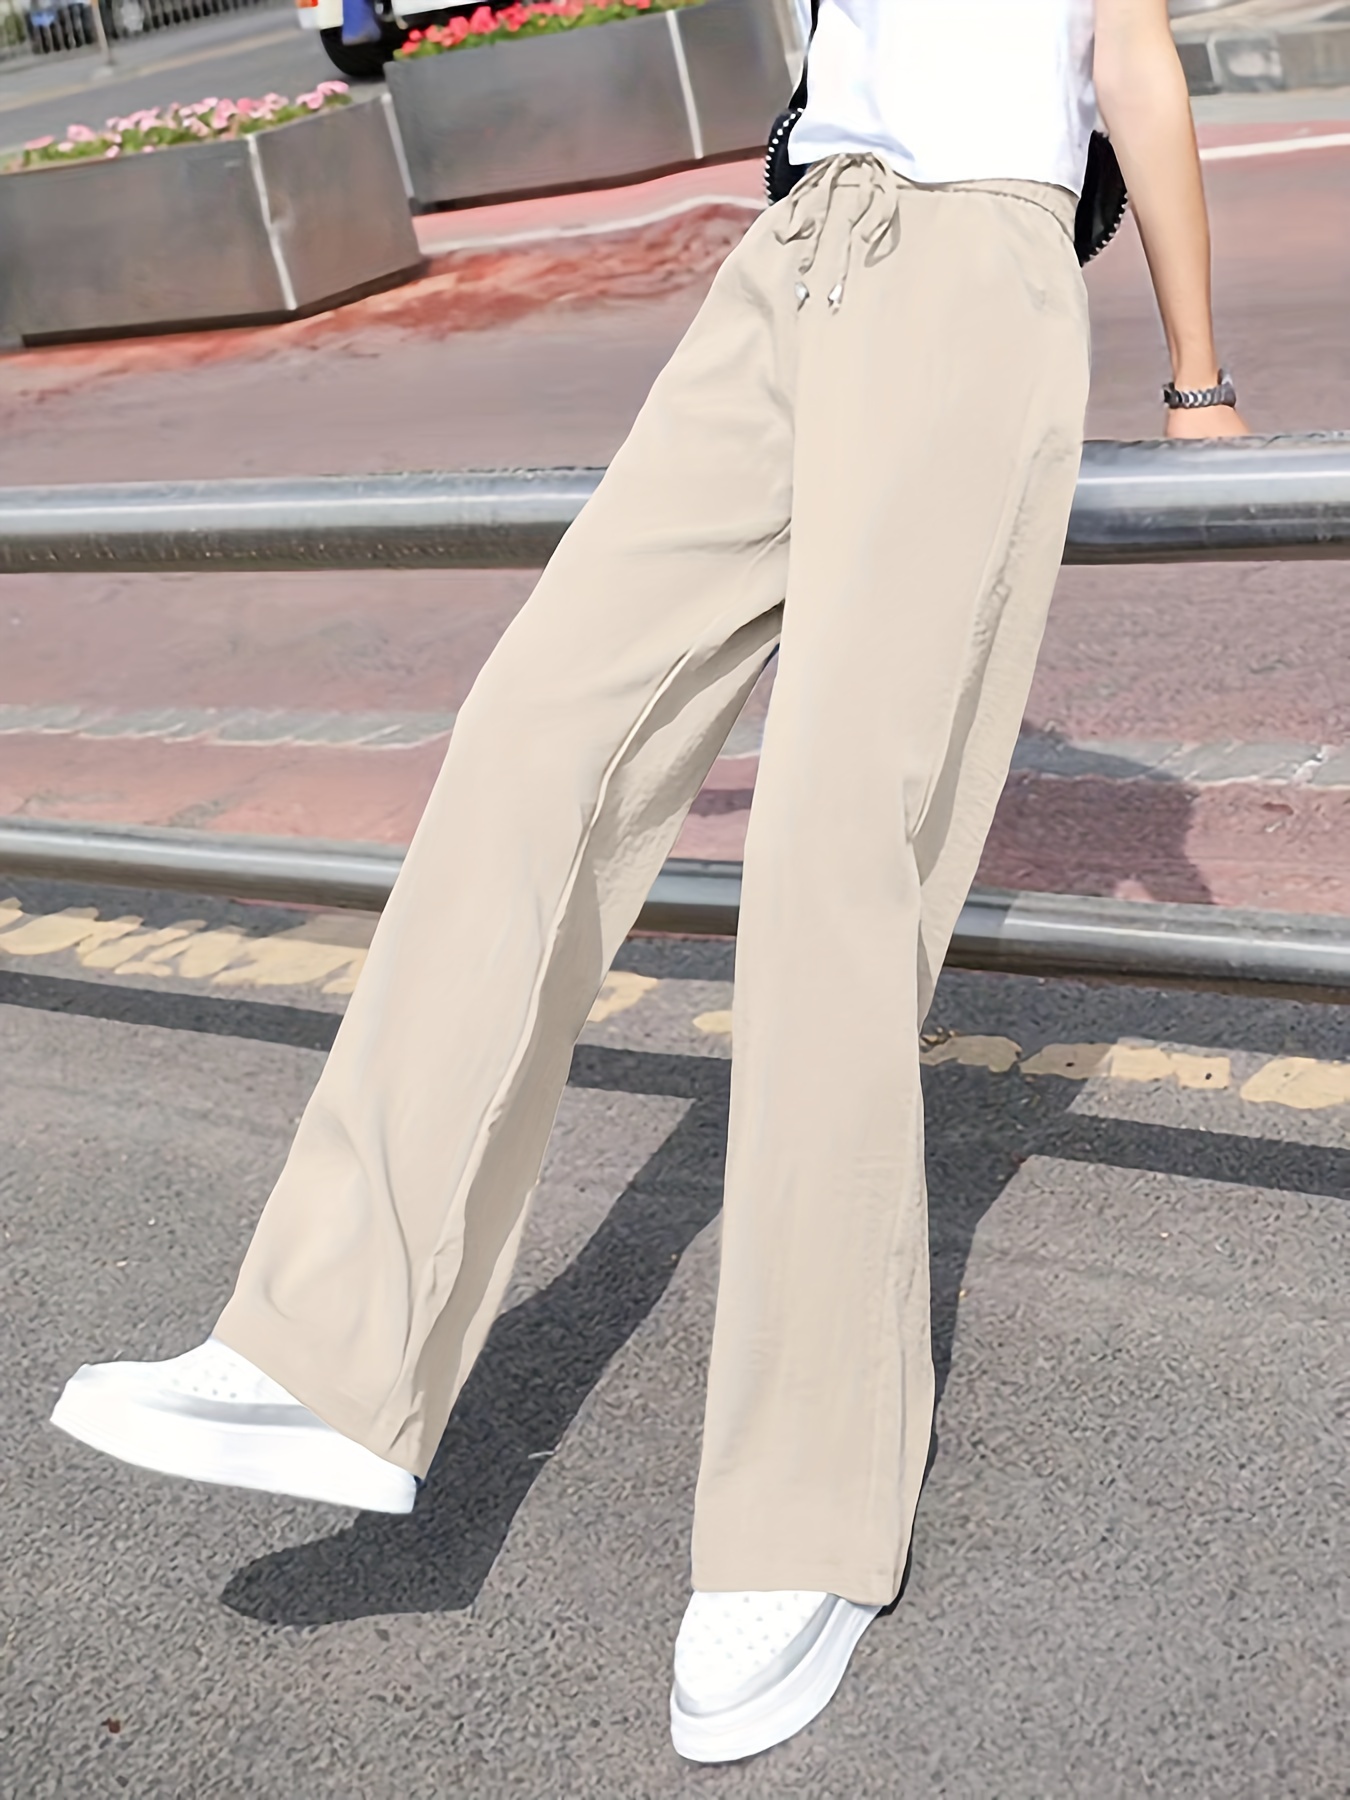 Black Casual Simple High Waist Wide Leg Pants With Belt